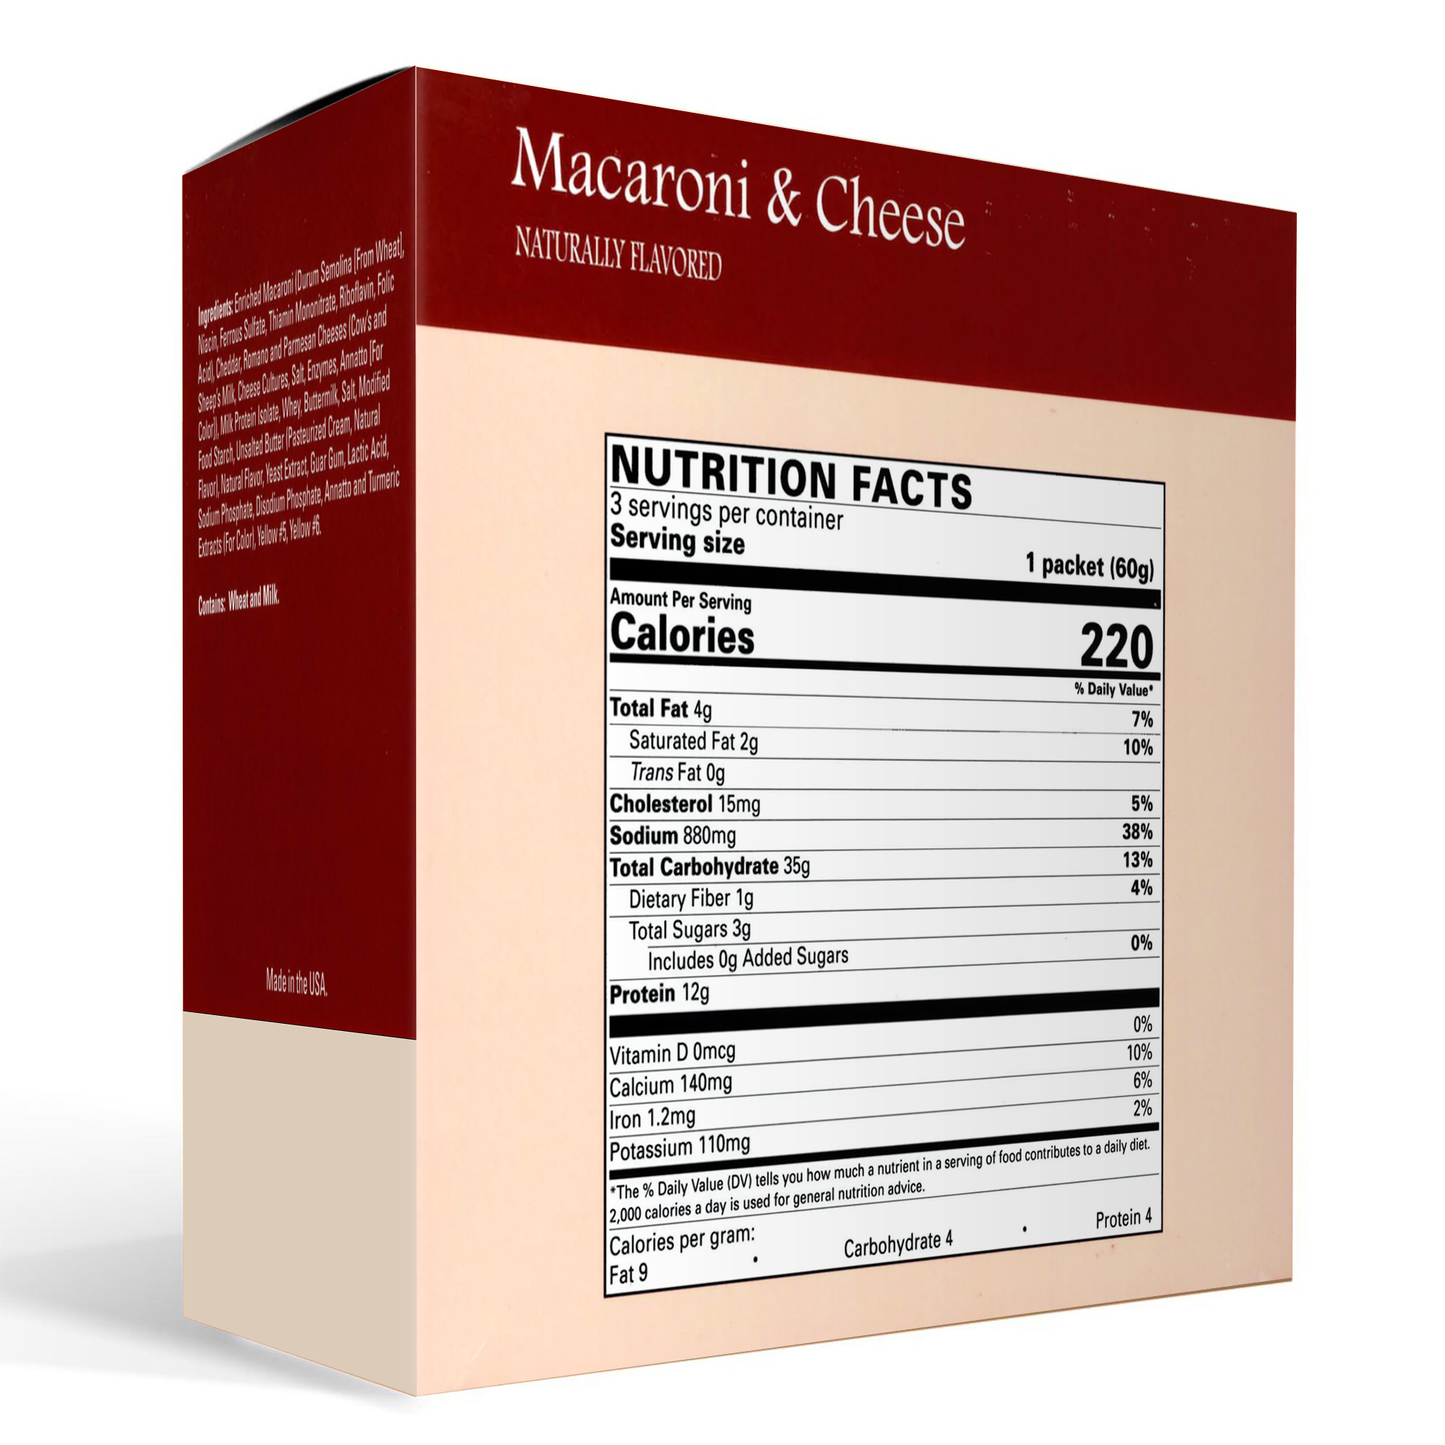 BestMed - Macaroni & Cheese Entree (3/Box) - Doctors Weight Loss